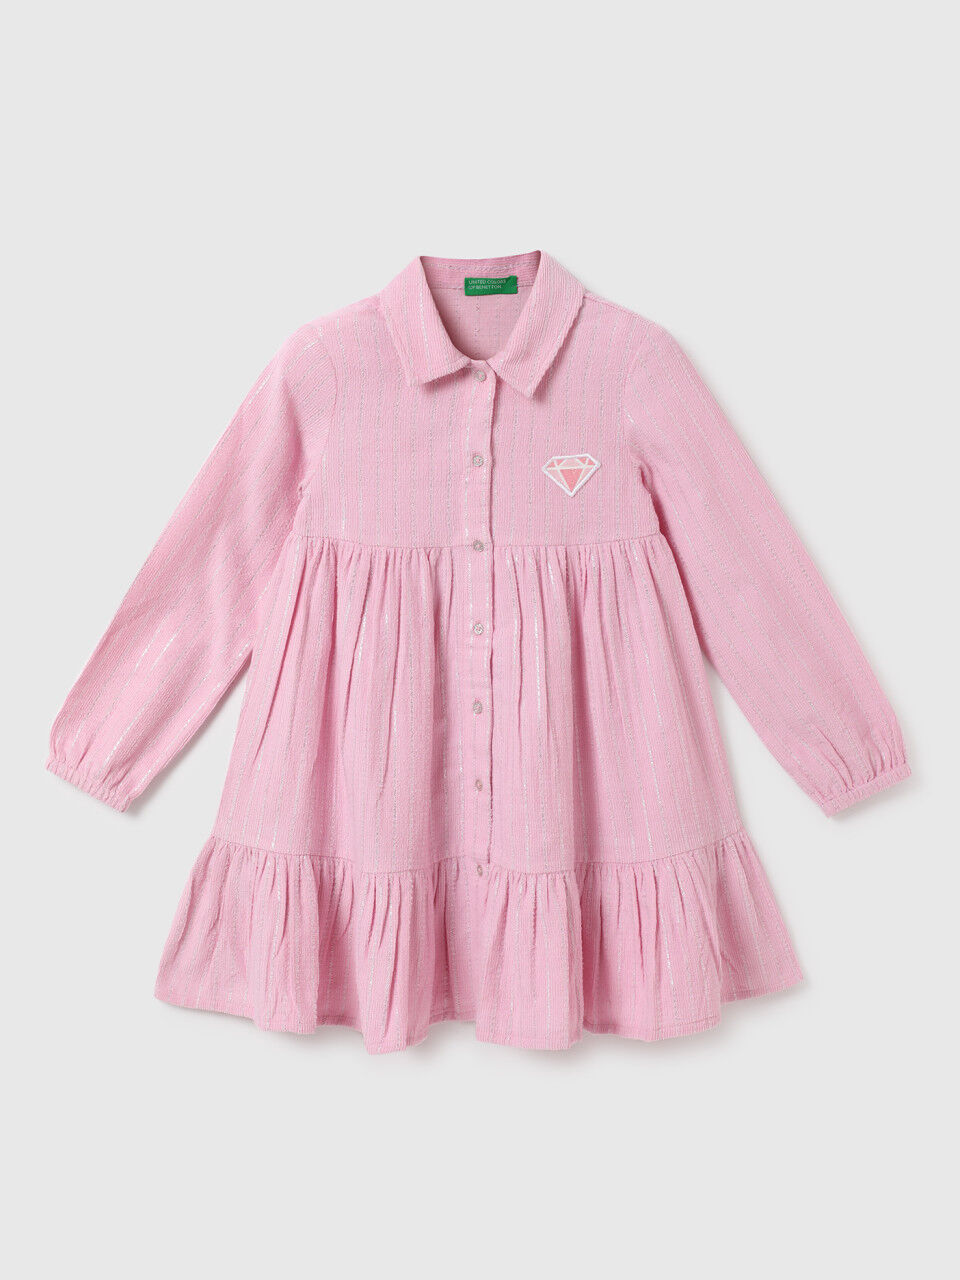 United Colors Of Benetton Girls Patterned Shirt Collar Dress